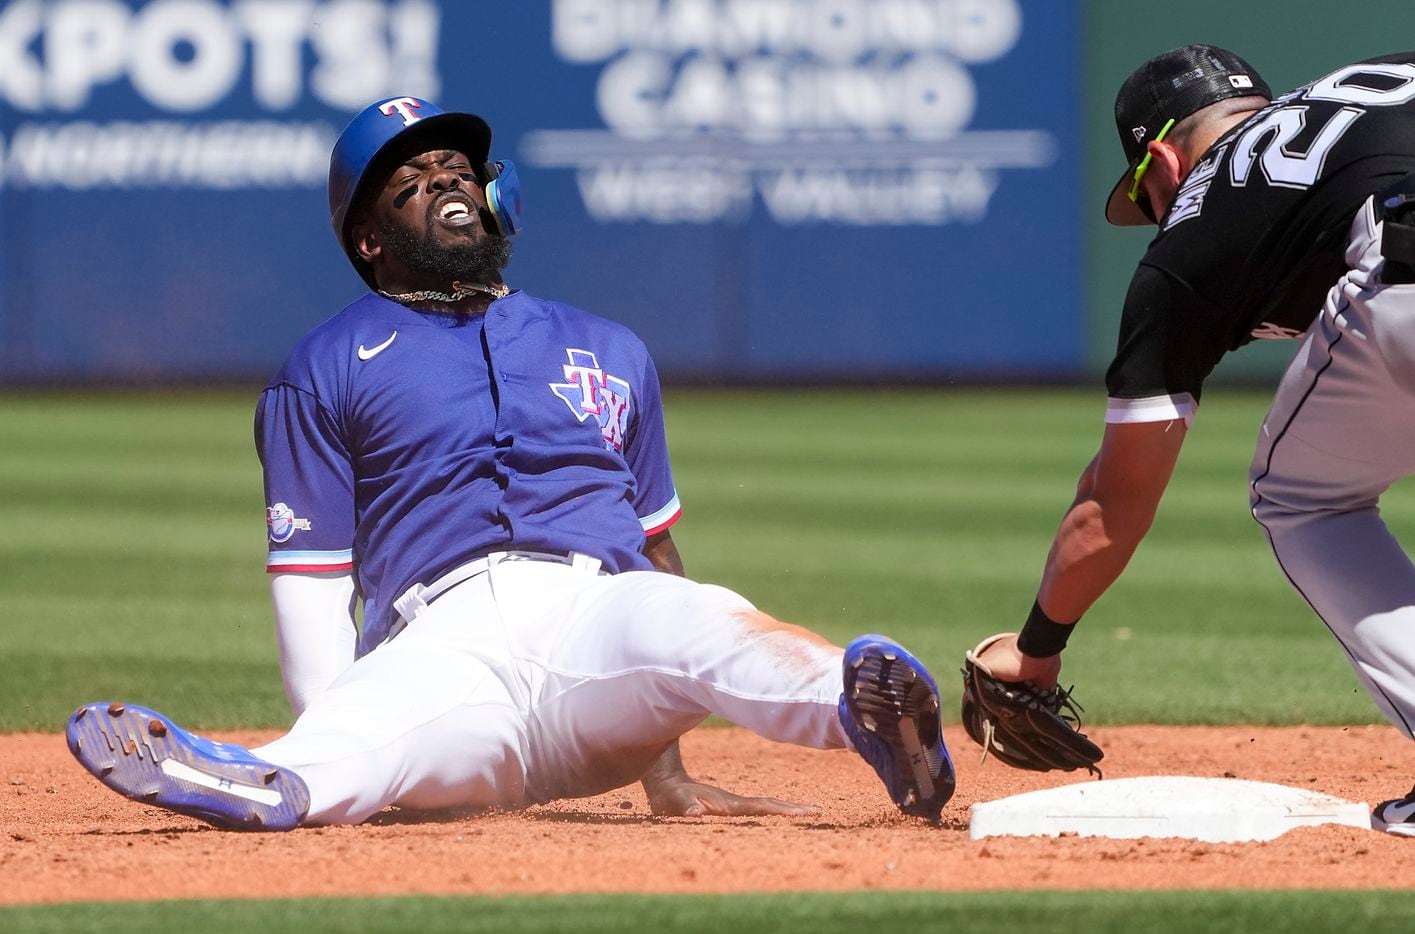 Texas Rangers outfielder Adolis García is out at second base after sliding past the bag on a...